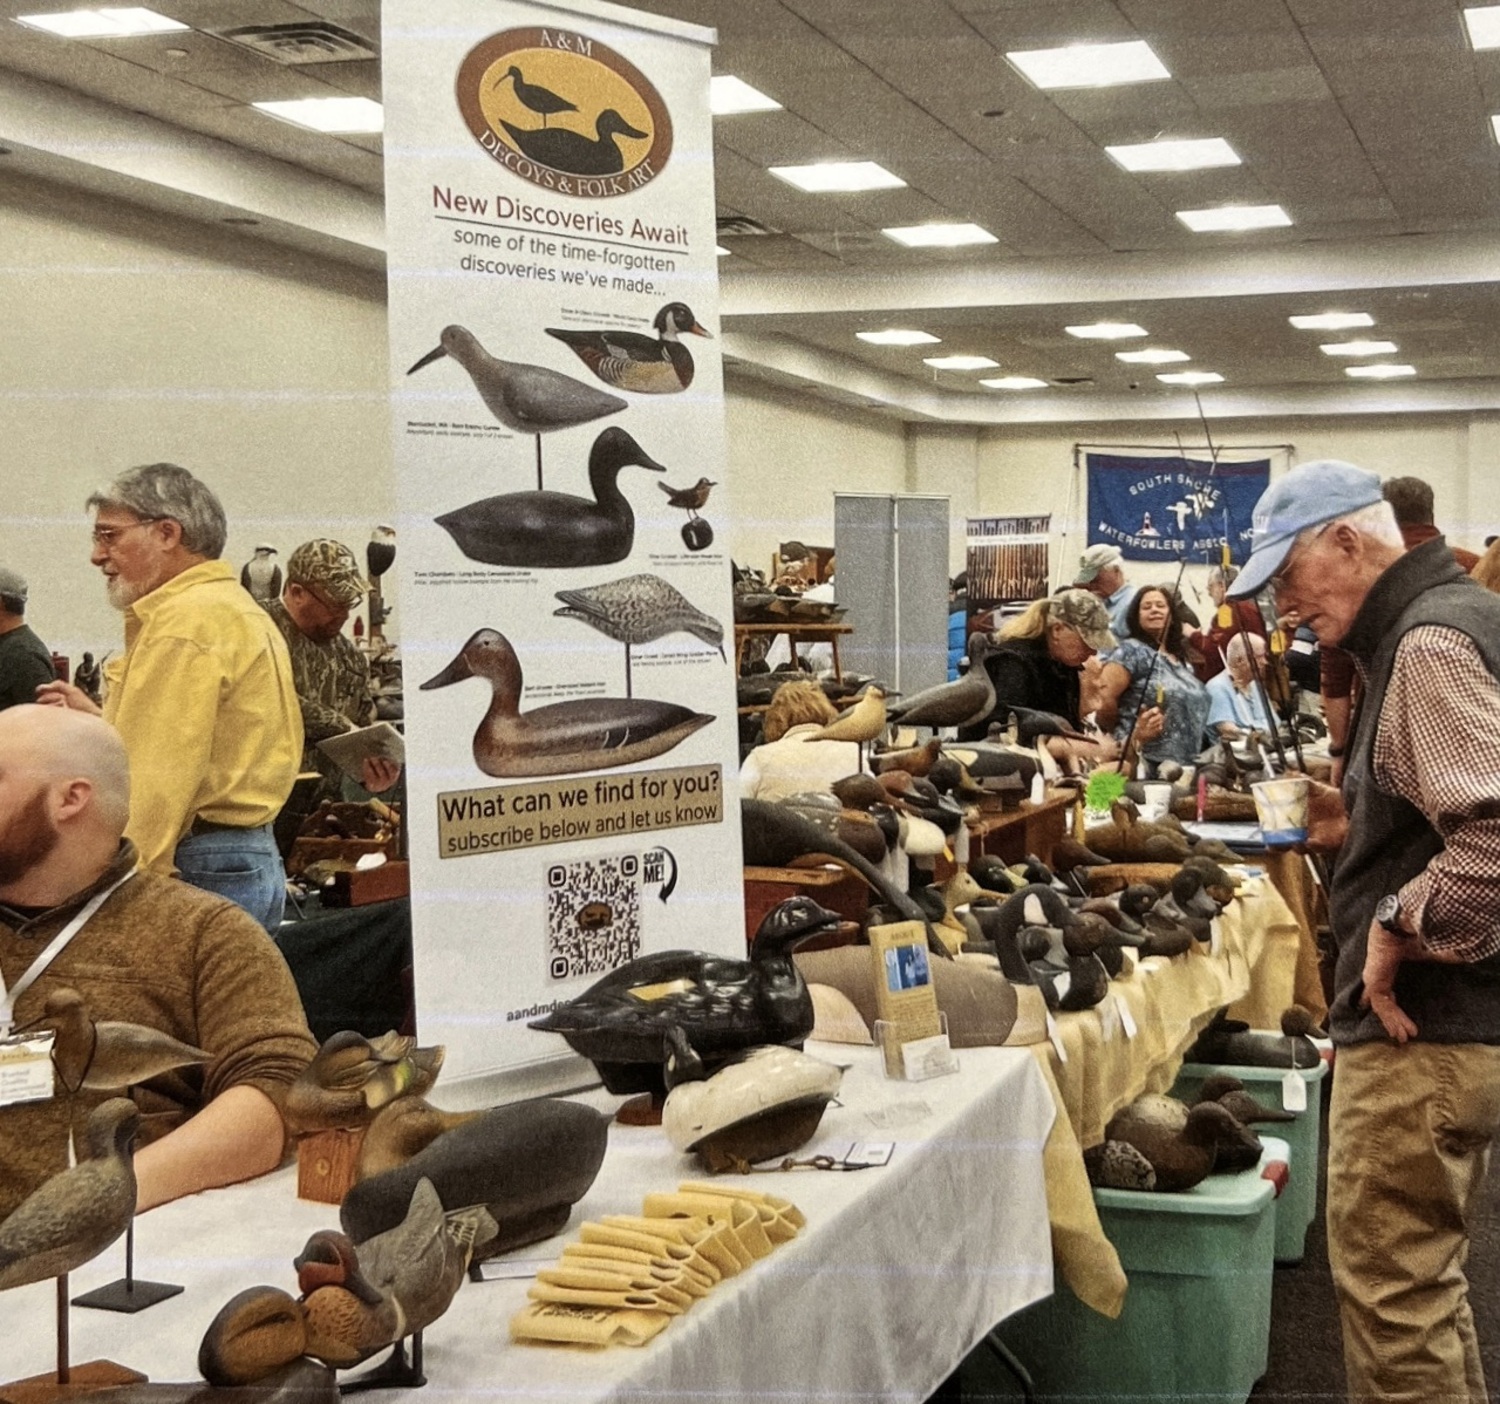 The 52nd Annual Long Island Decoy Collectors Association Show will take place next Saturday, March 2, in Hauppauge. This year's show will honor the 100th anniversary of the Pattersquach Gunners Association, one of the oldest remaining duck clubs on the East Coast.